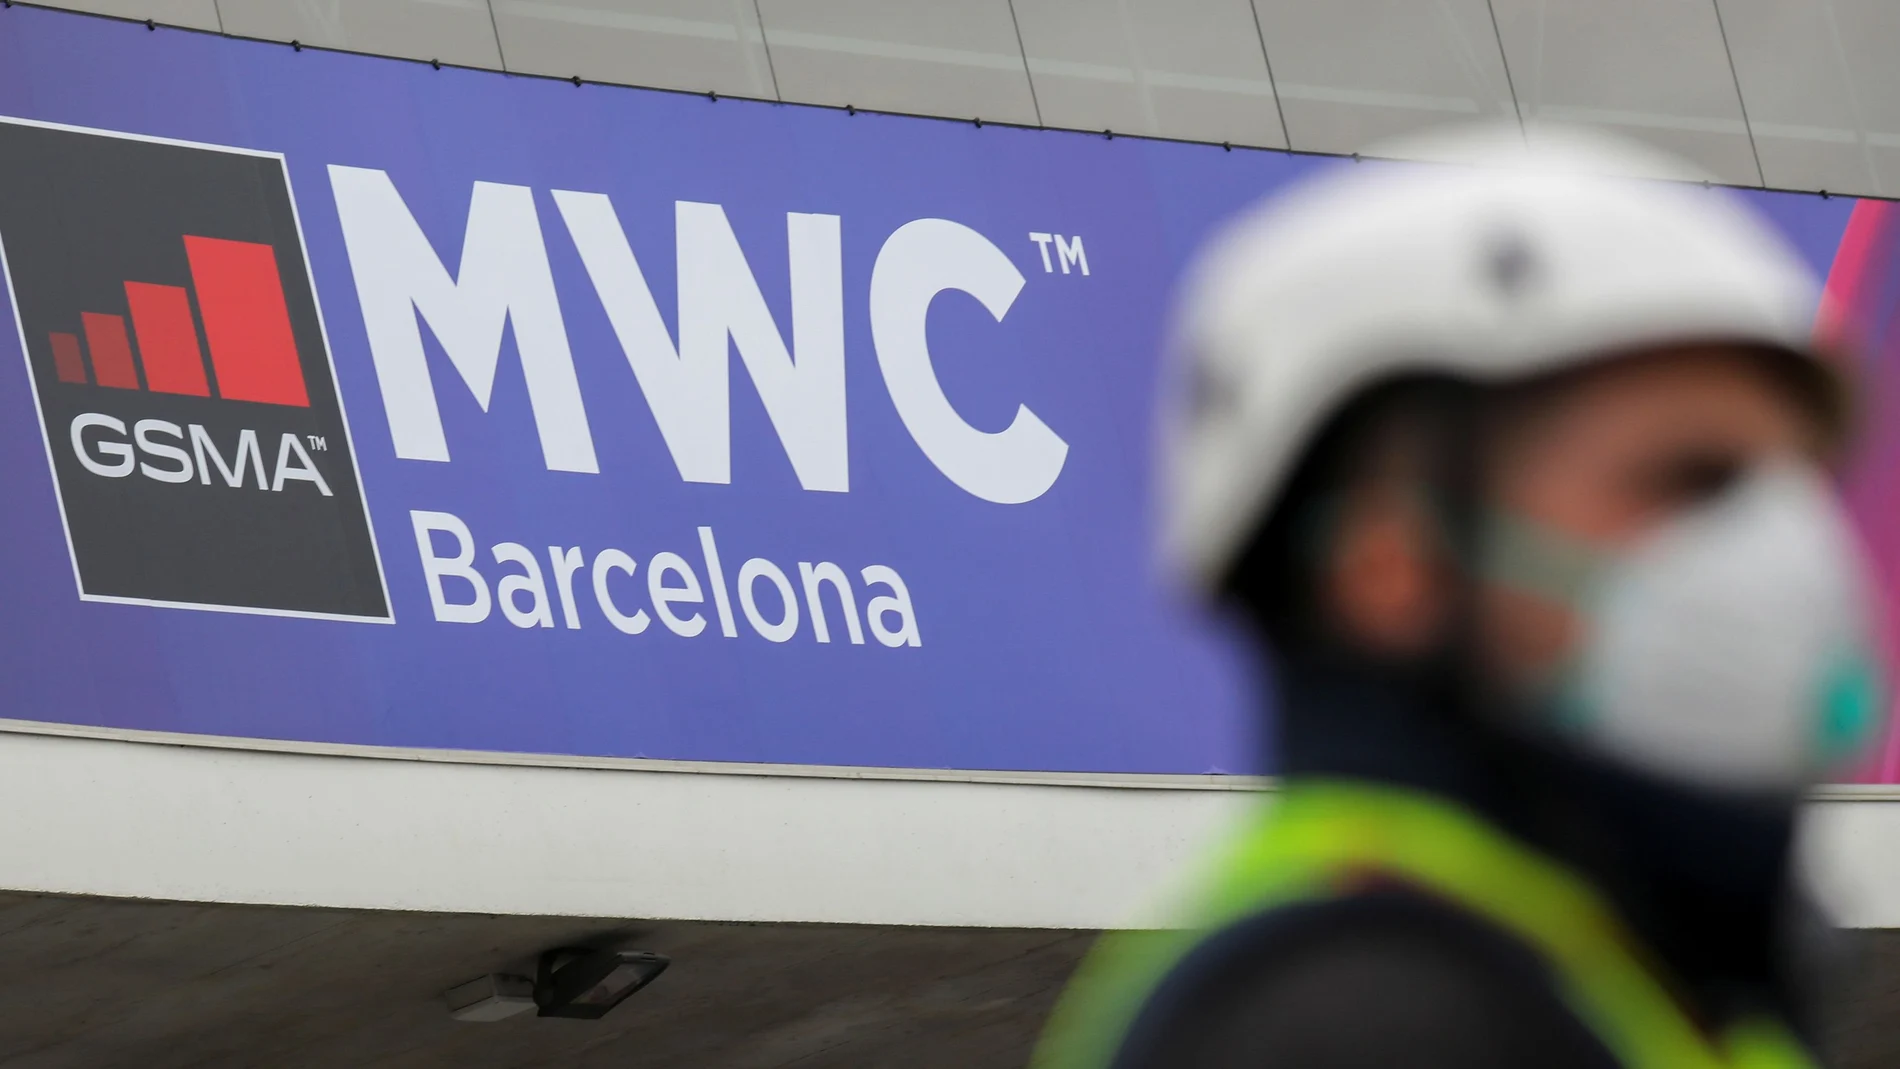 Employee is pictured next to the logo of MWC20 (Mobile World Congress) in Barcelona